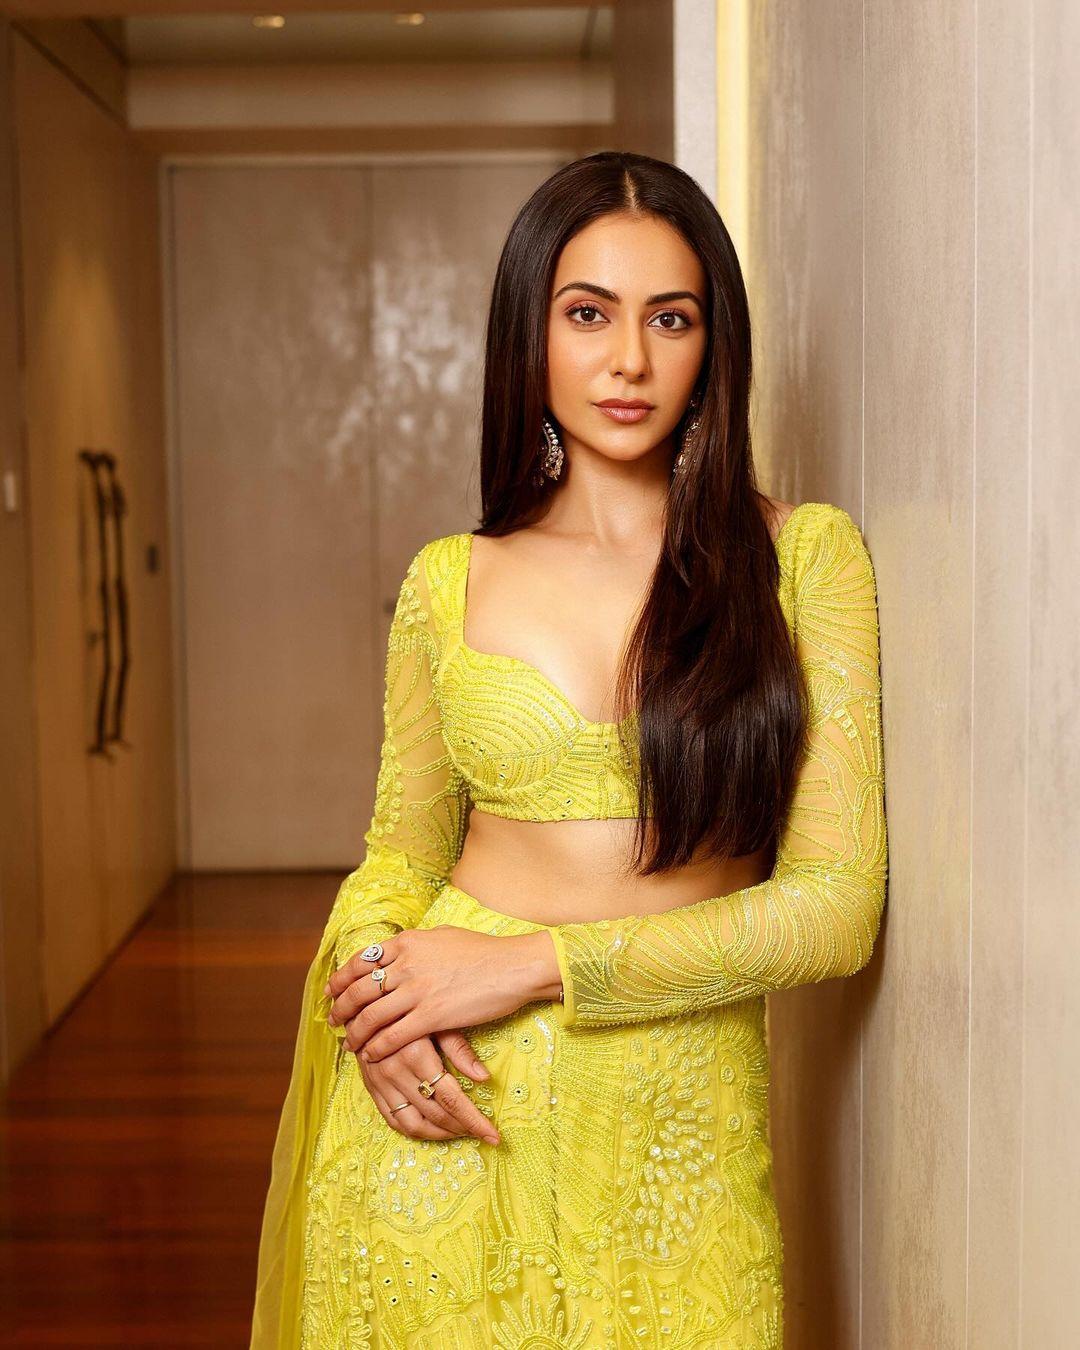 Rakul keeps her makeup simple and leaves her hair open. This look is a definite must-have for anyone aiming to make a statement this Basant Panchami